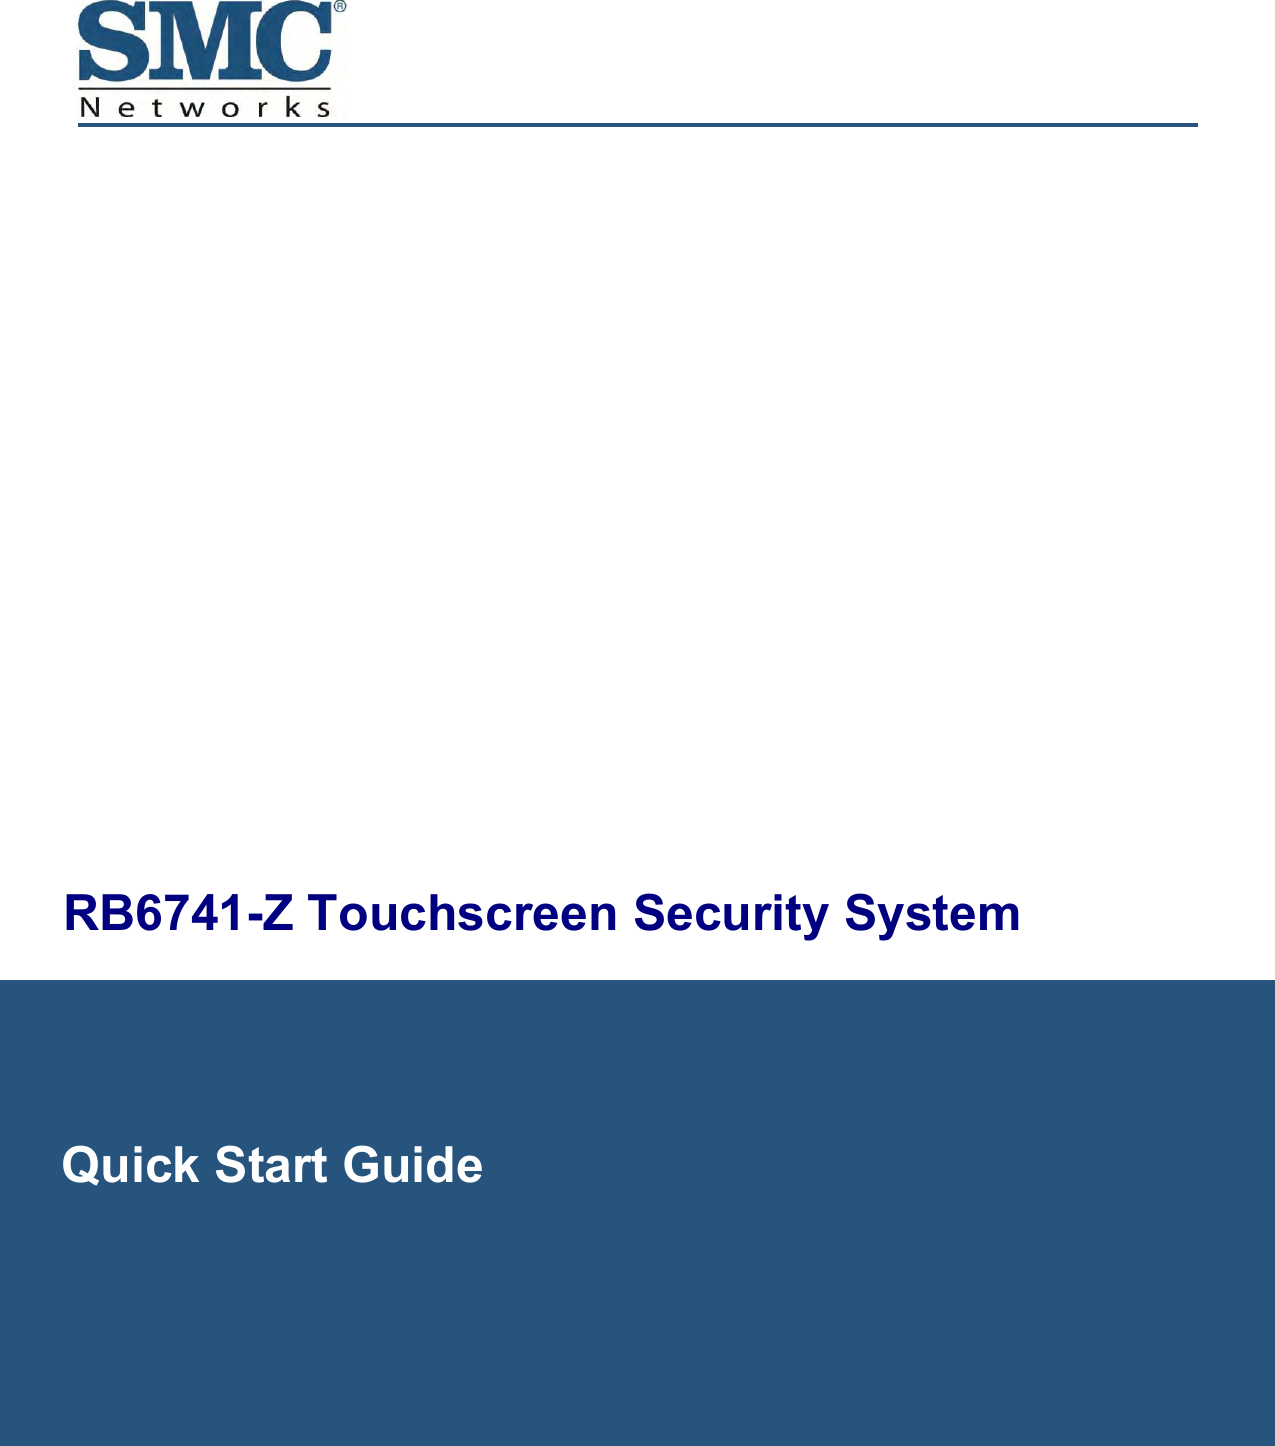         Quick Start Guide  RB6741-Z Touchscreen Security System             